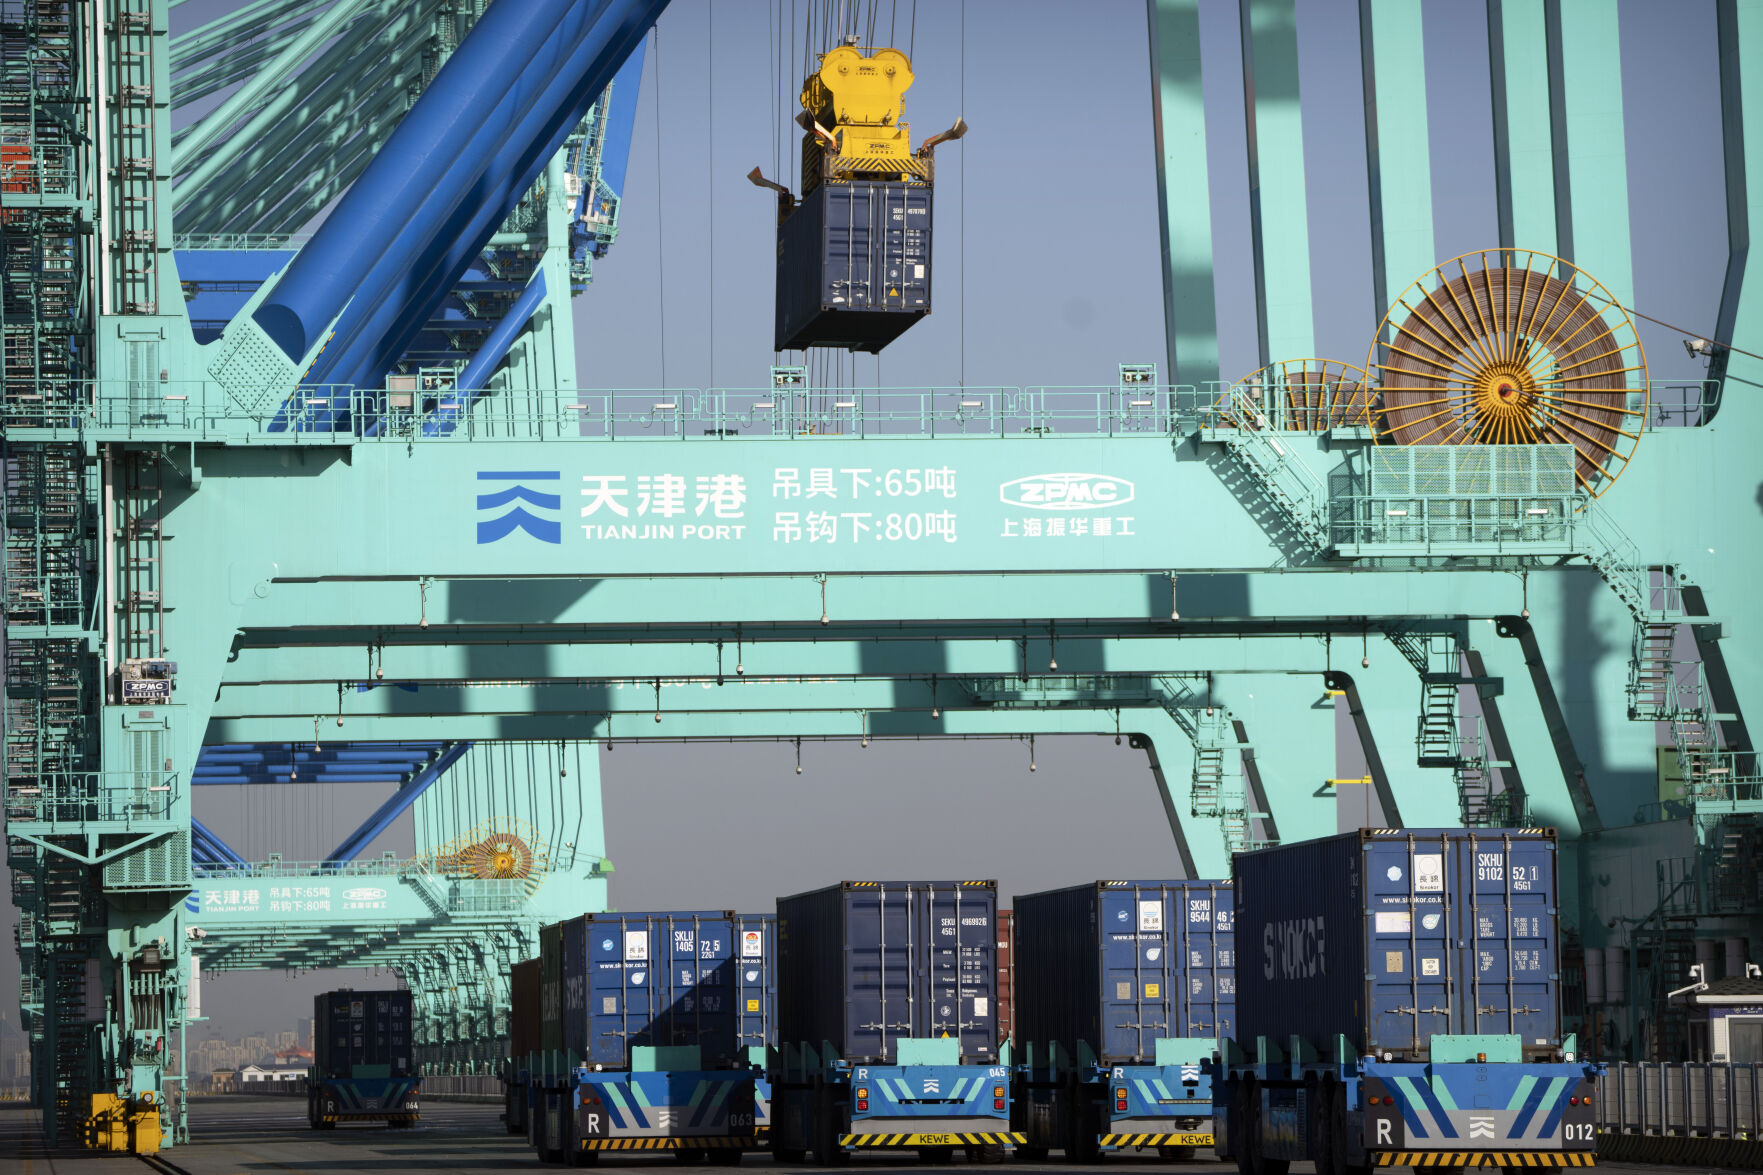 <p>Driverless trucks move shipping containers at a port in Tianjin, China, Monday, Jan. 16, 2023. Chinese exports grew in April by 8.5% to $295.4 billion compared with a year earlier despite weakening global demand. (AP Photo/Mark Schiefelbein)</p>   PHOTO CREDIT: Mark Schiefelbein 